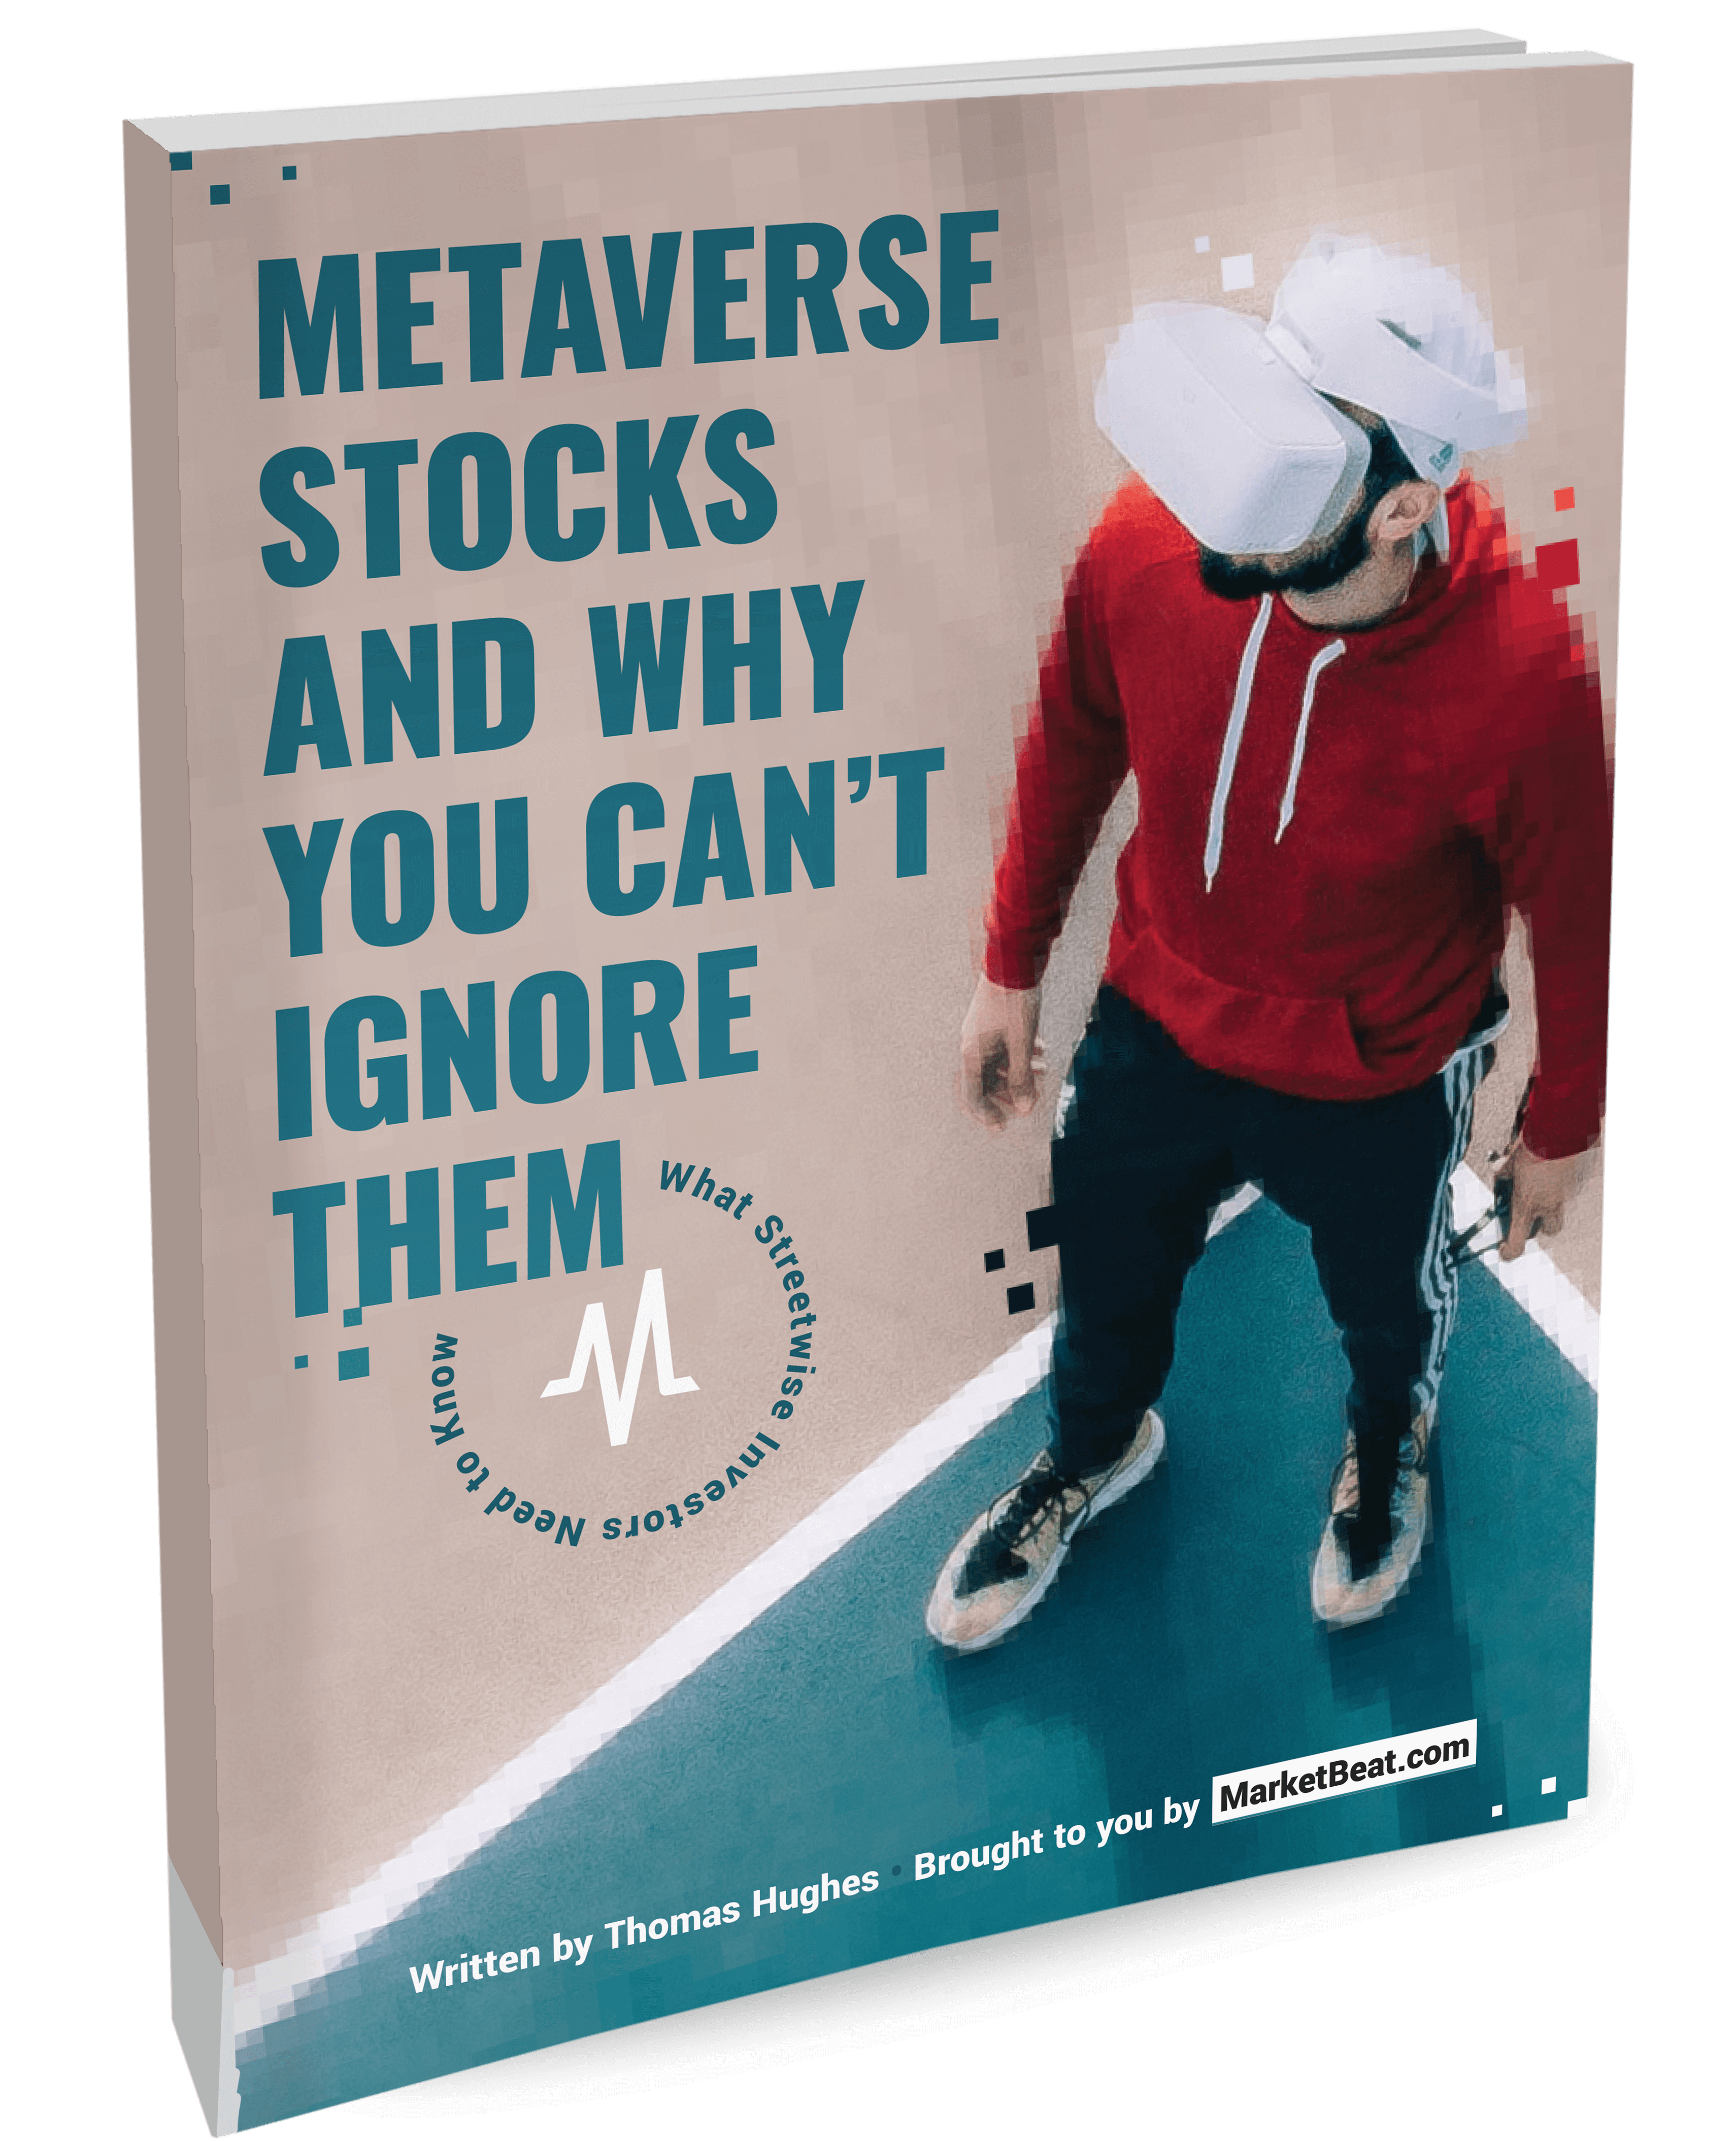 Metaverse Stocks and Why You Can't Ignore It